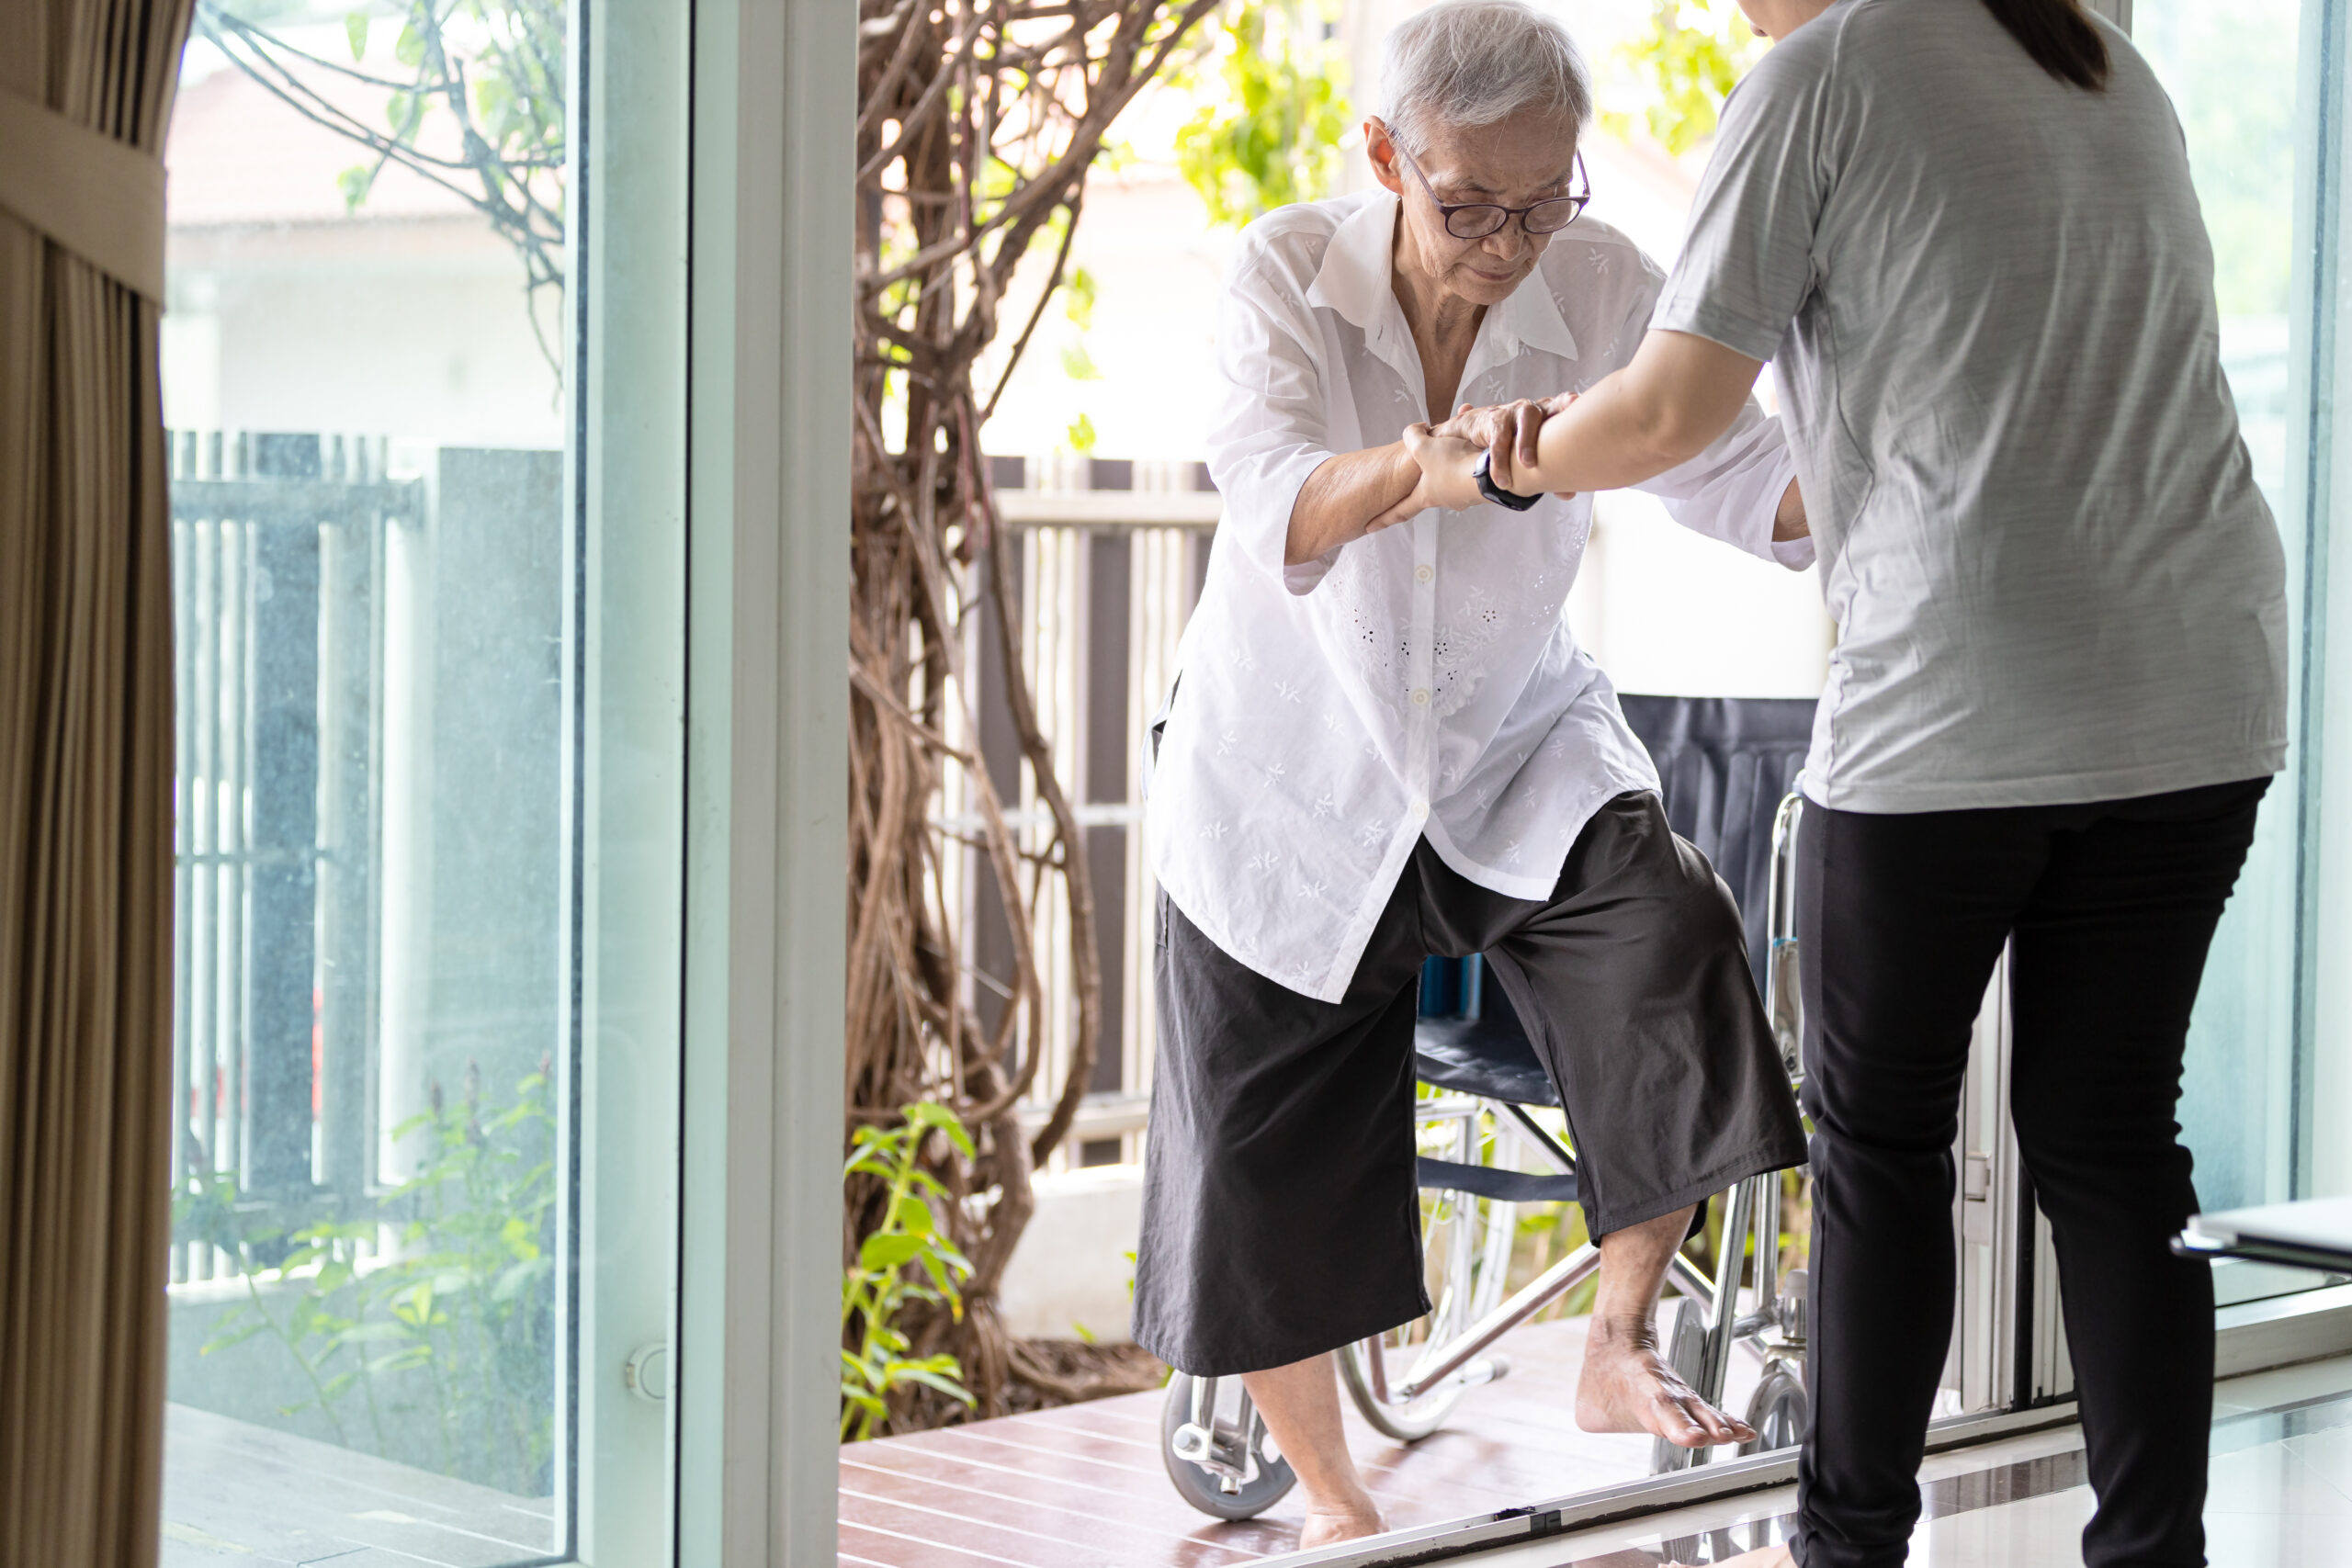 physical therapy can help older adults build strength and avoid falls